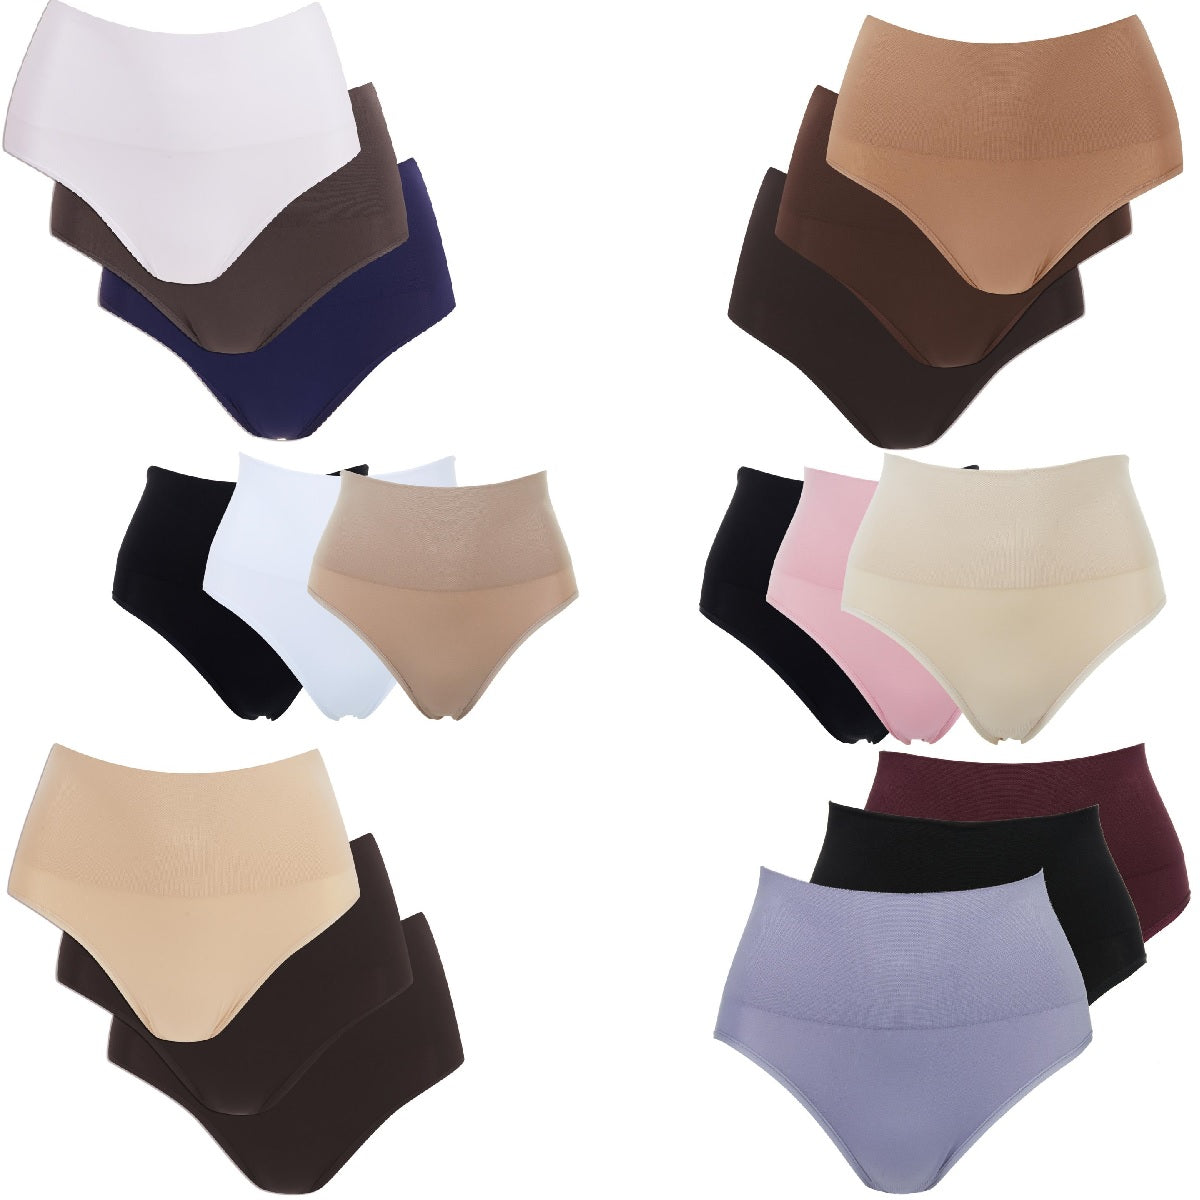 Yummie by Heather Thomson Women's Seamless Brief Panties, 6 Pack 